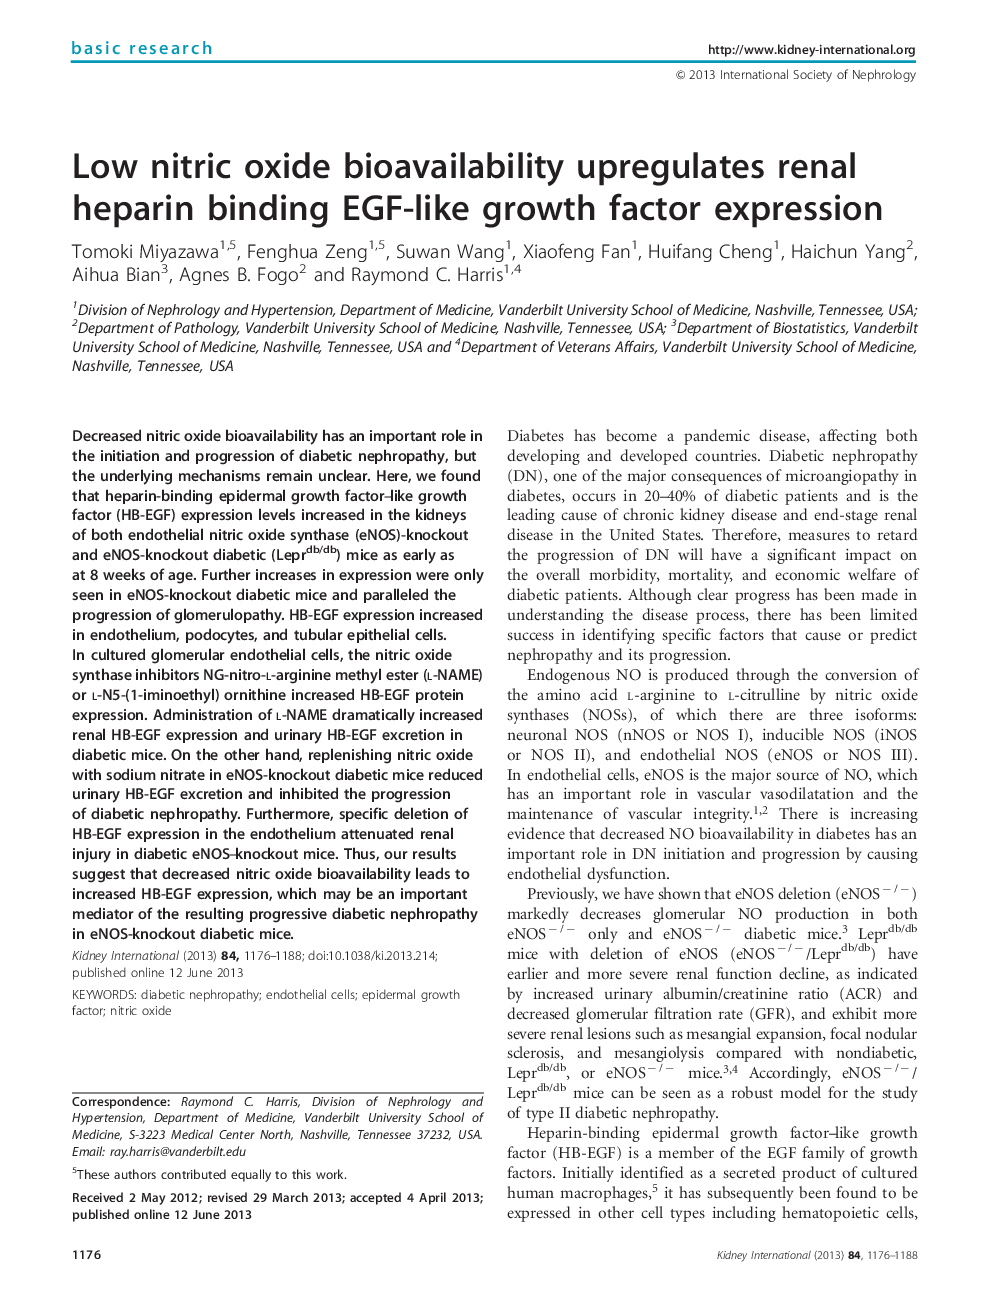 Low nitric oxide bioavailability upregulates renal heparin binding EGF-like growth factor expression